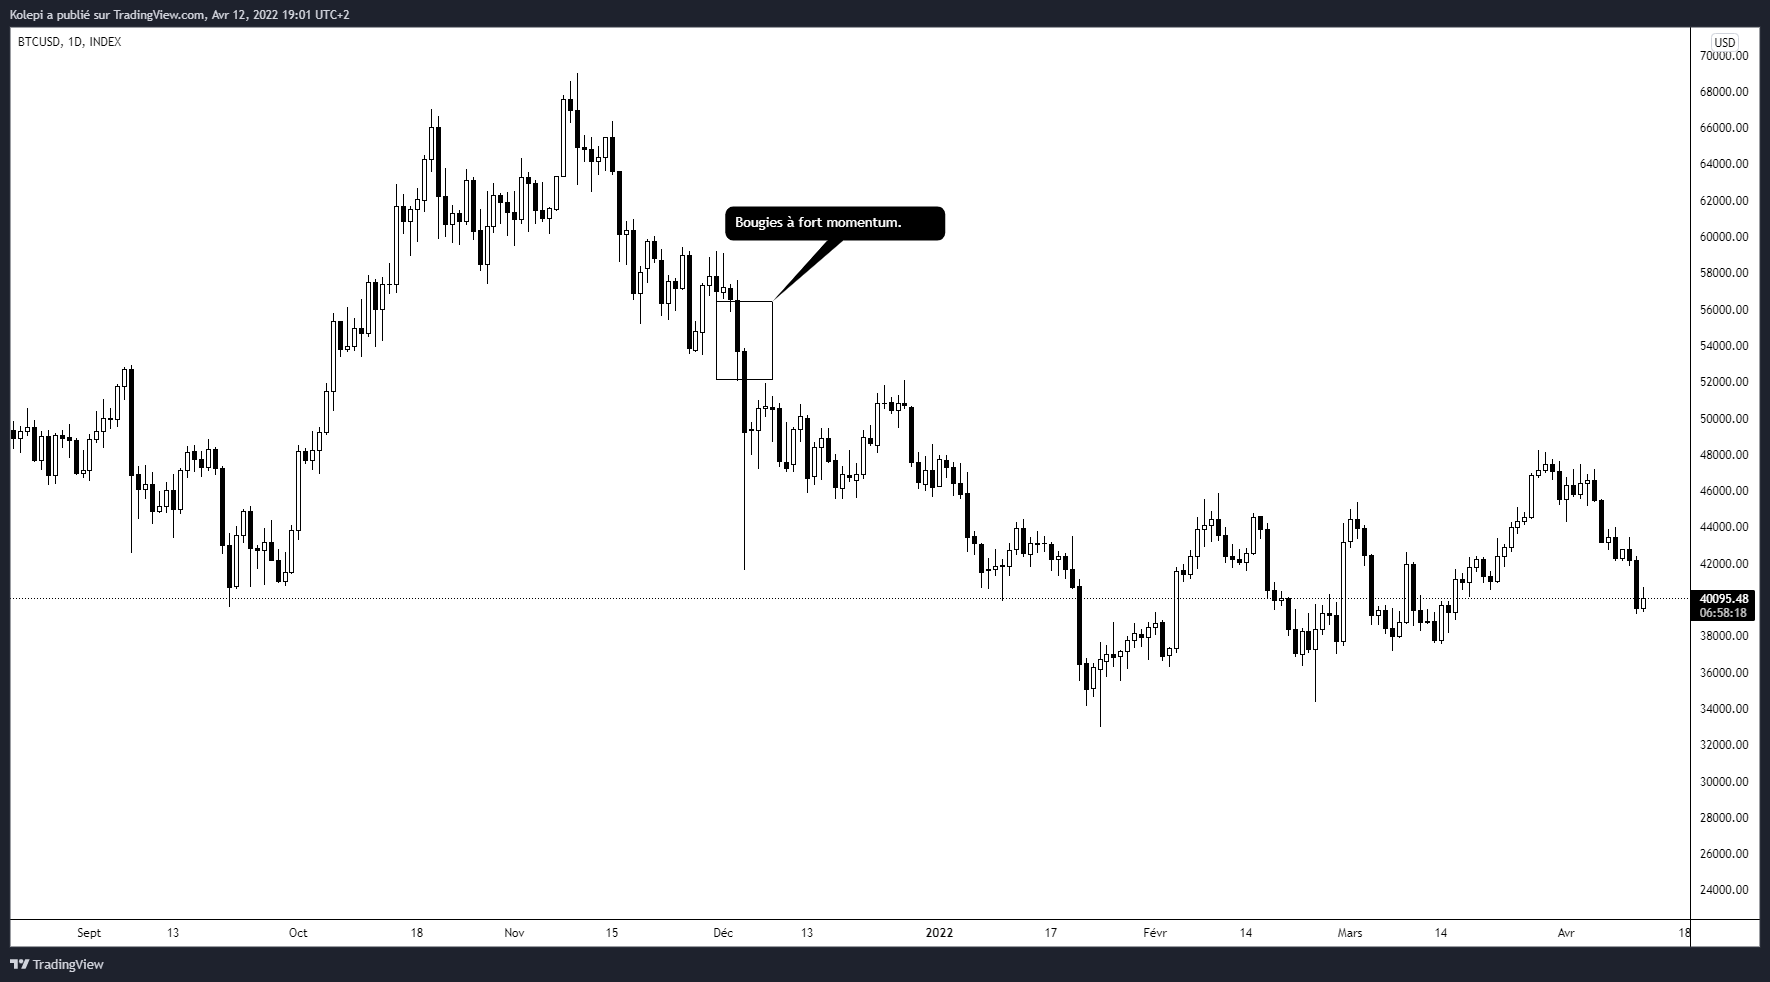 Example of a high momentum candle